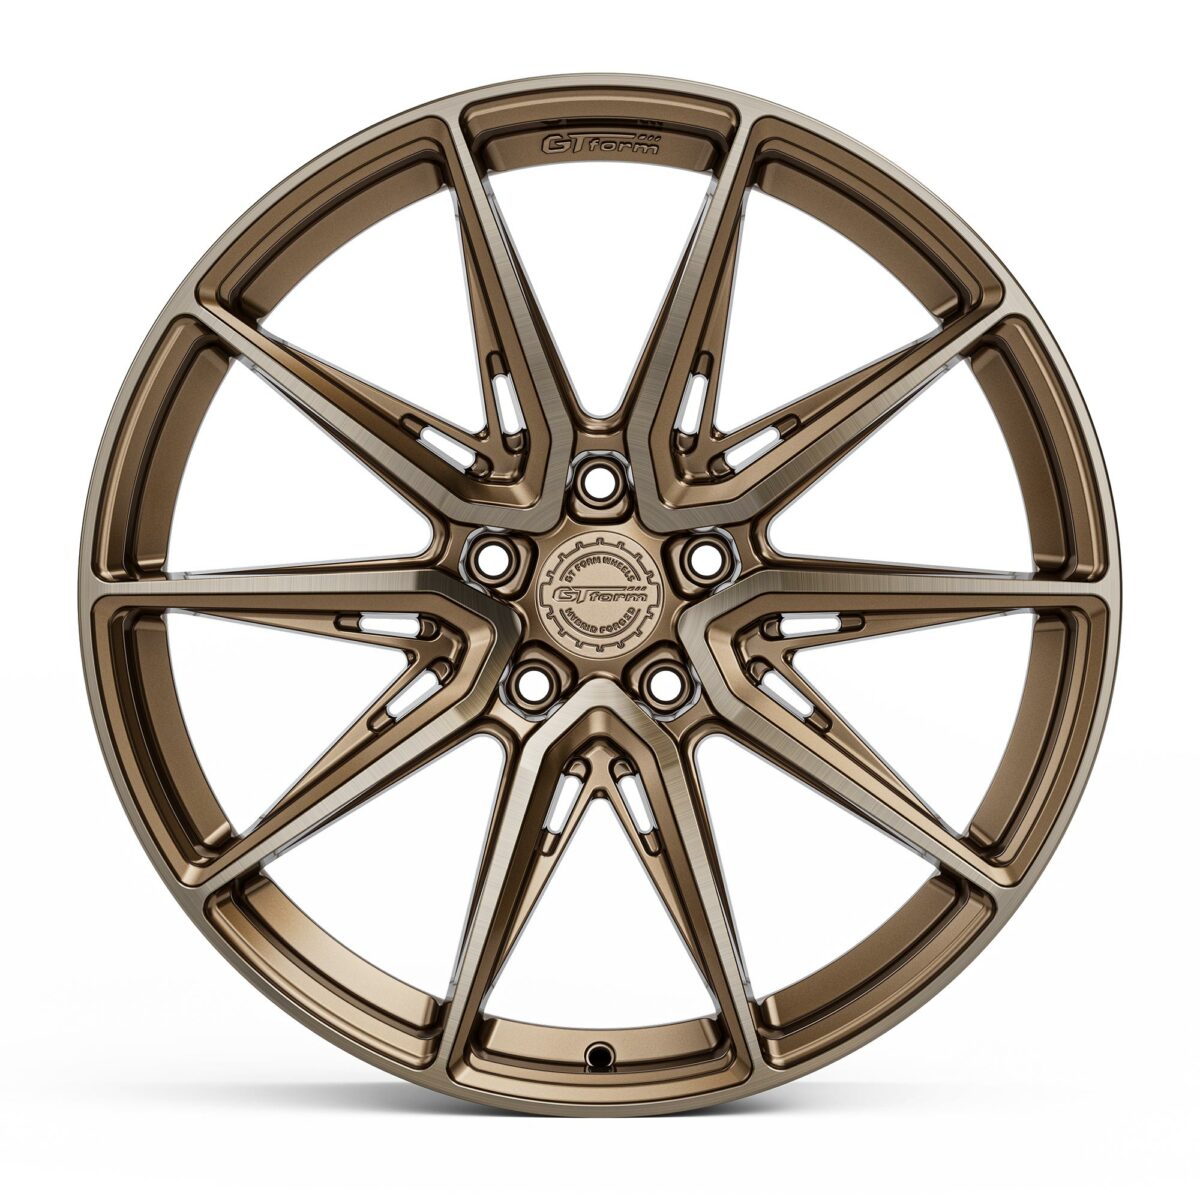 PERFORMANCE WHEELS GT FORM HF4.1 HYBRID FORGED BRUSHED BRONZE 20X9 20X10.5 20X12 STAGGERED RIMS